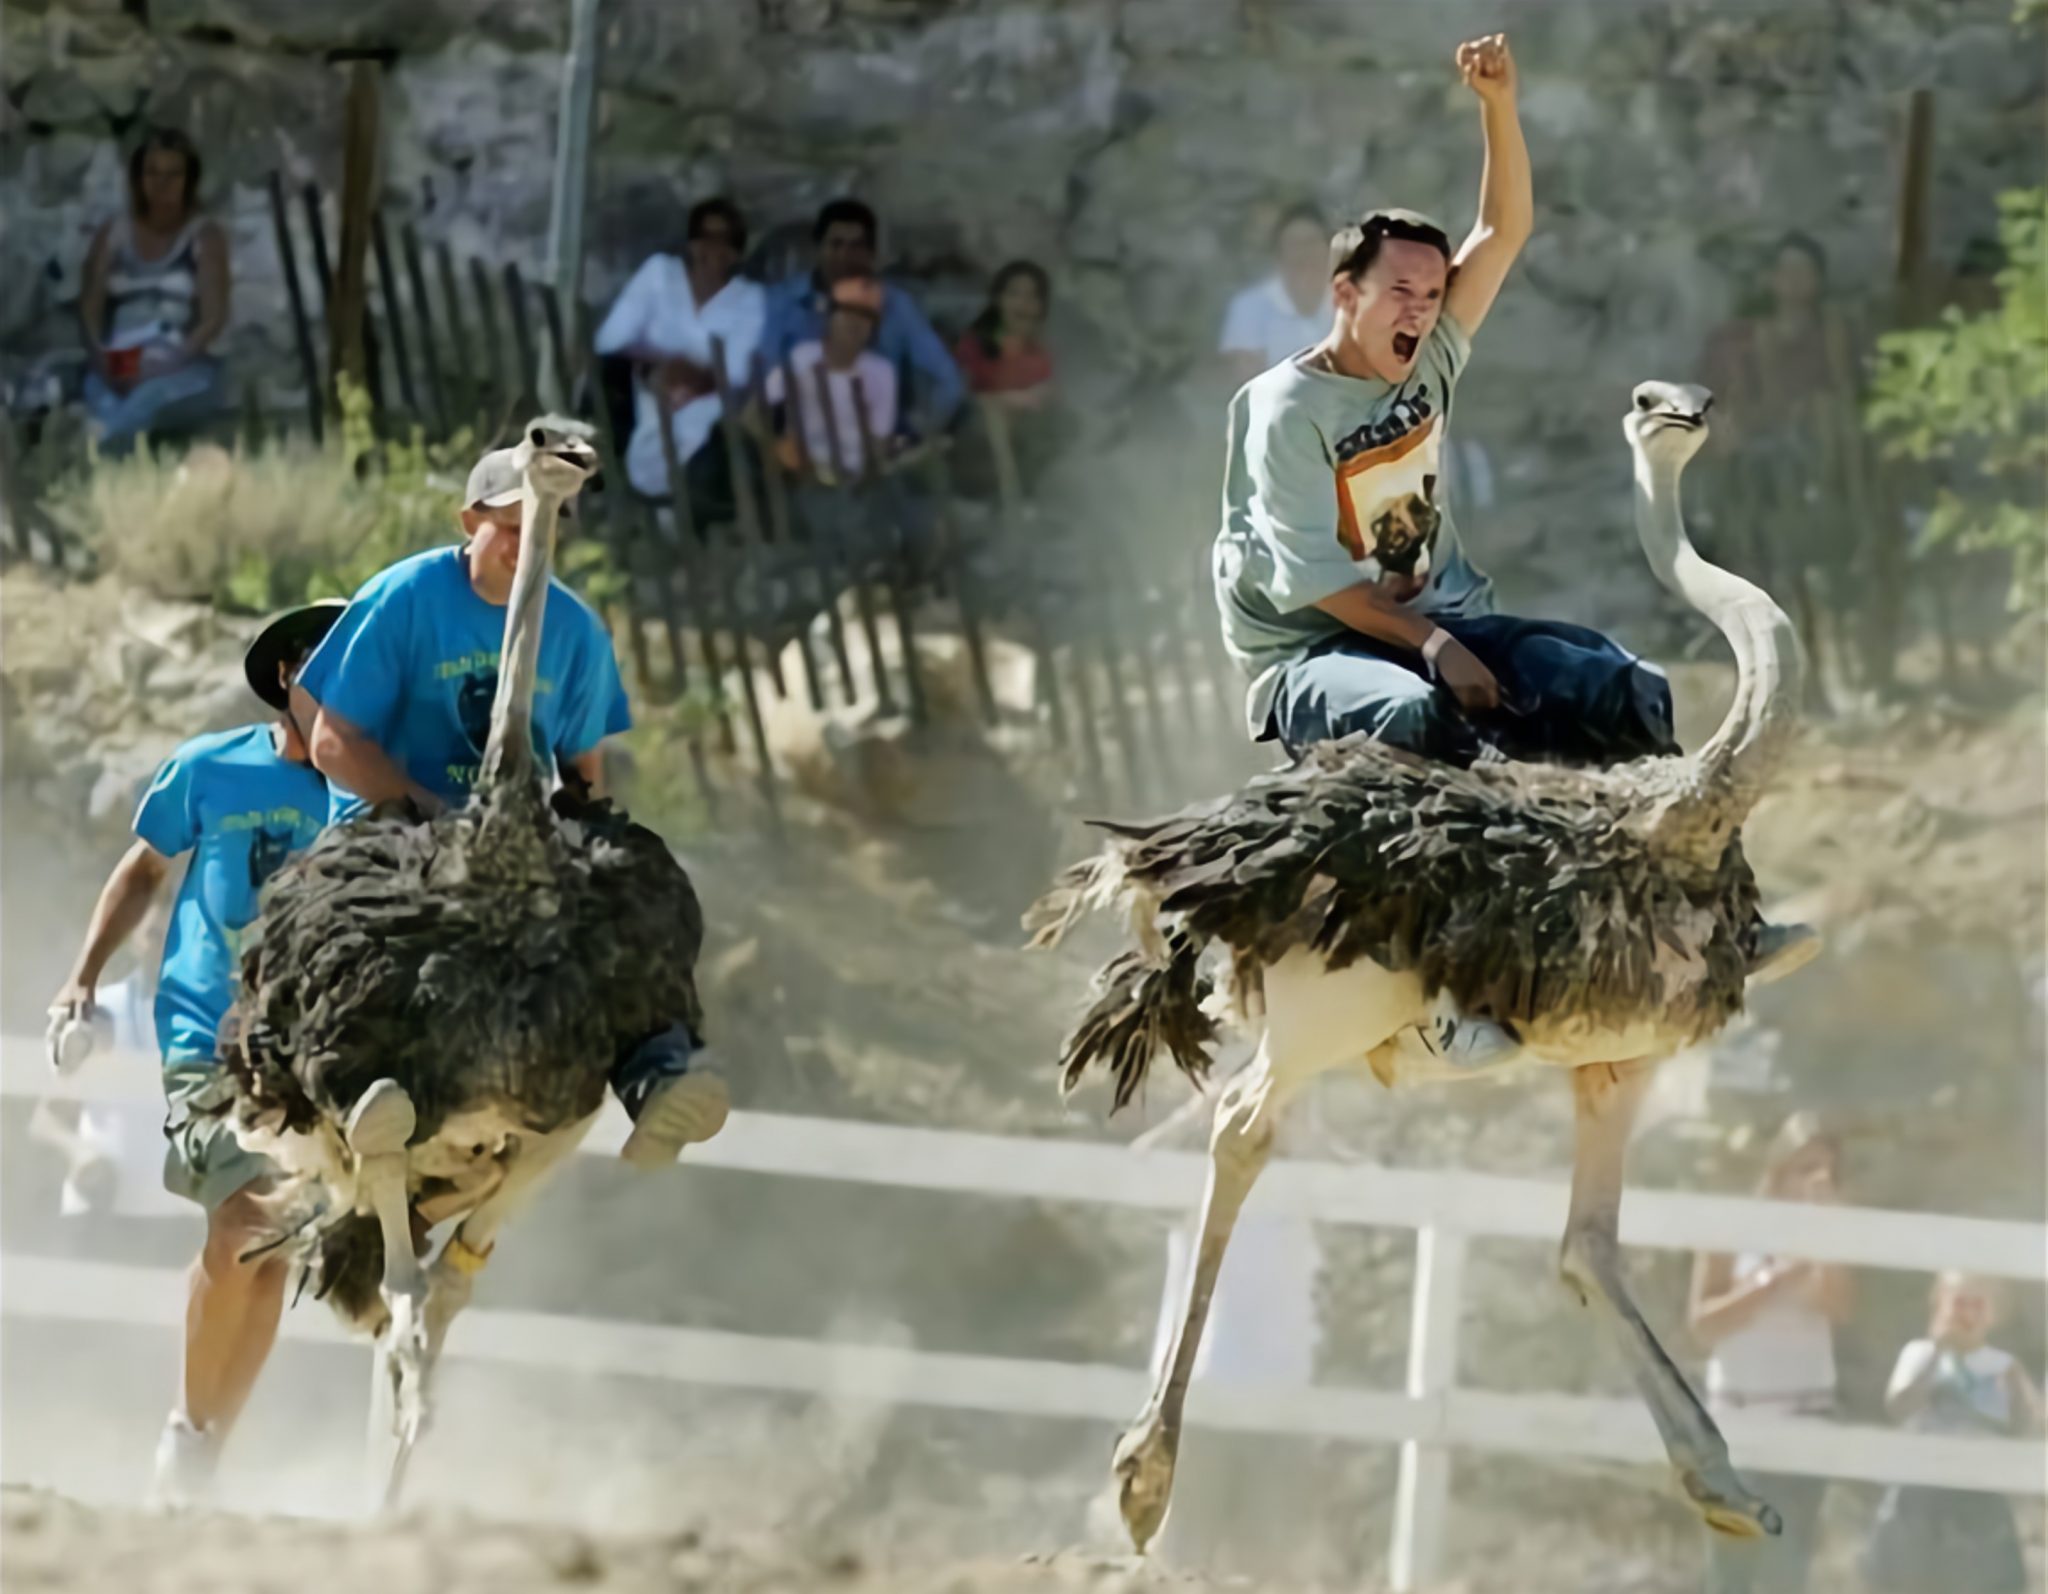 The Bizarre Sport of Ostrich Riding & Exotic Racing on Ostriches